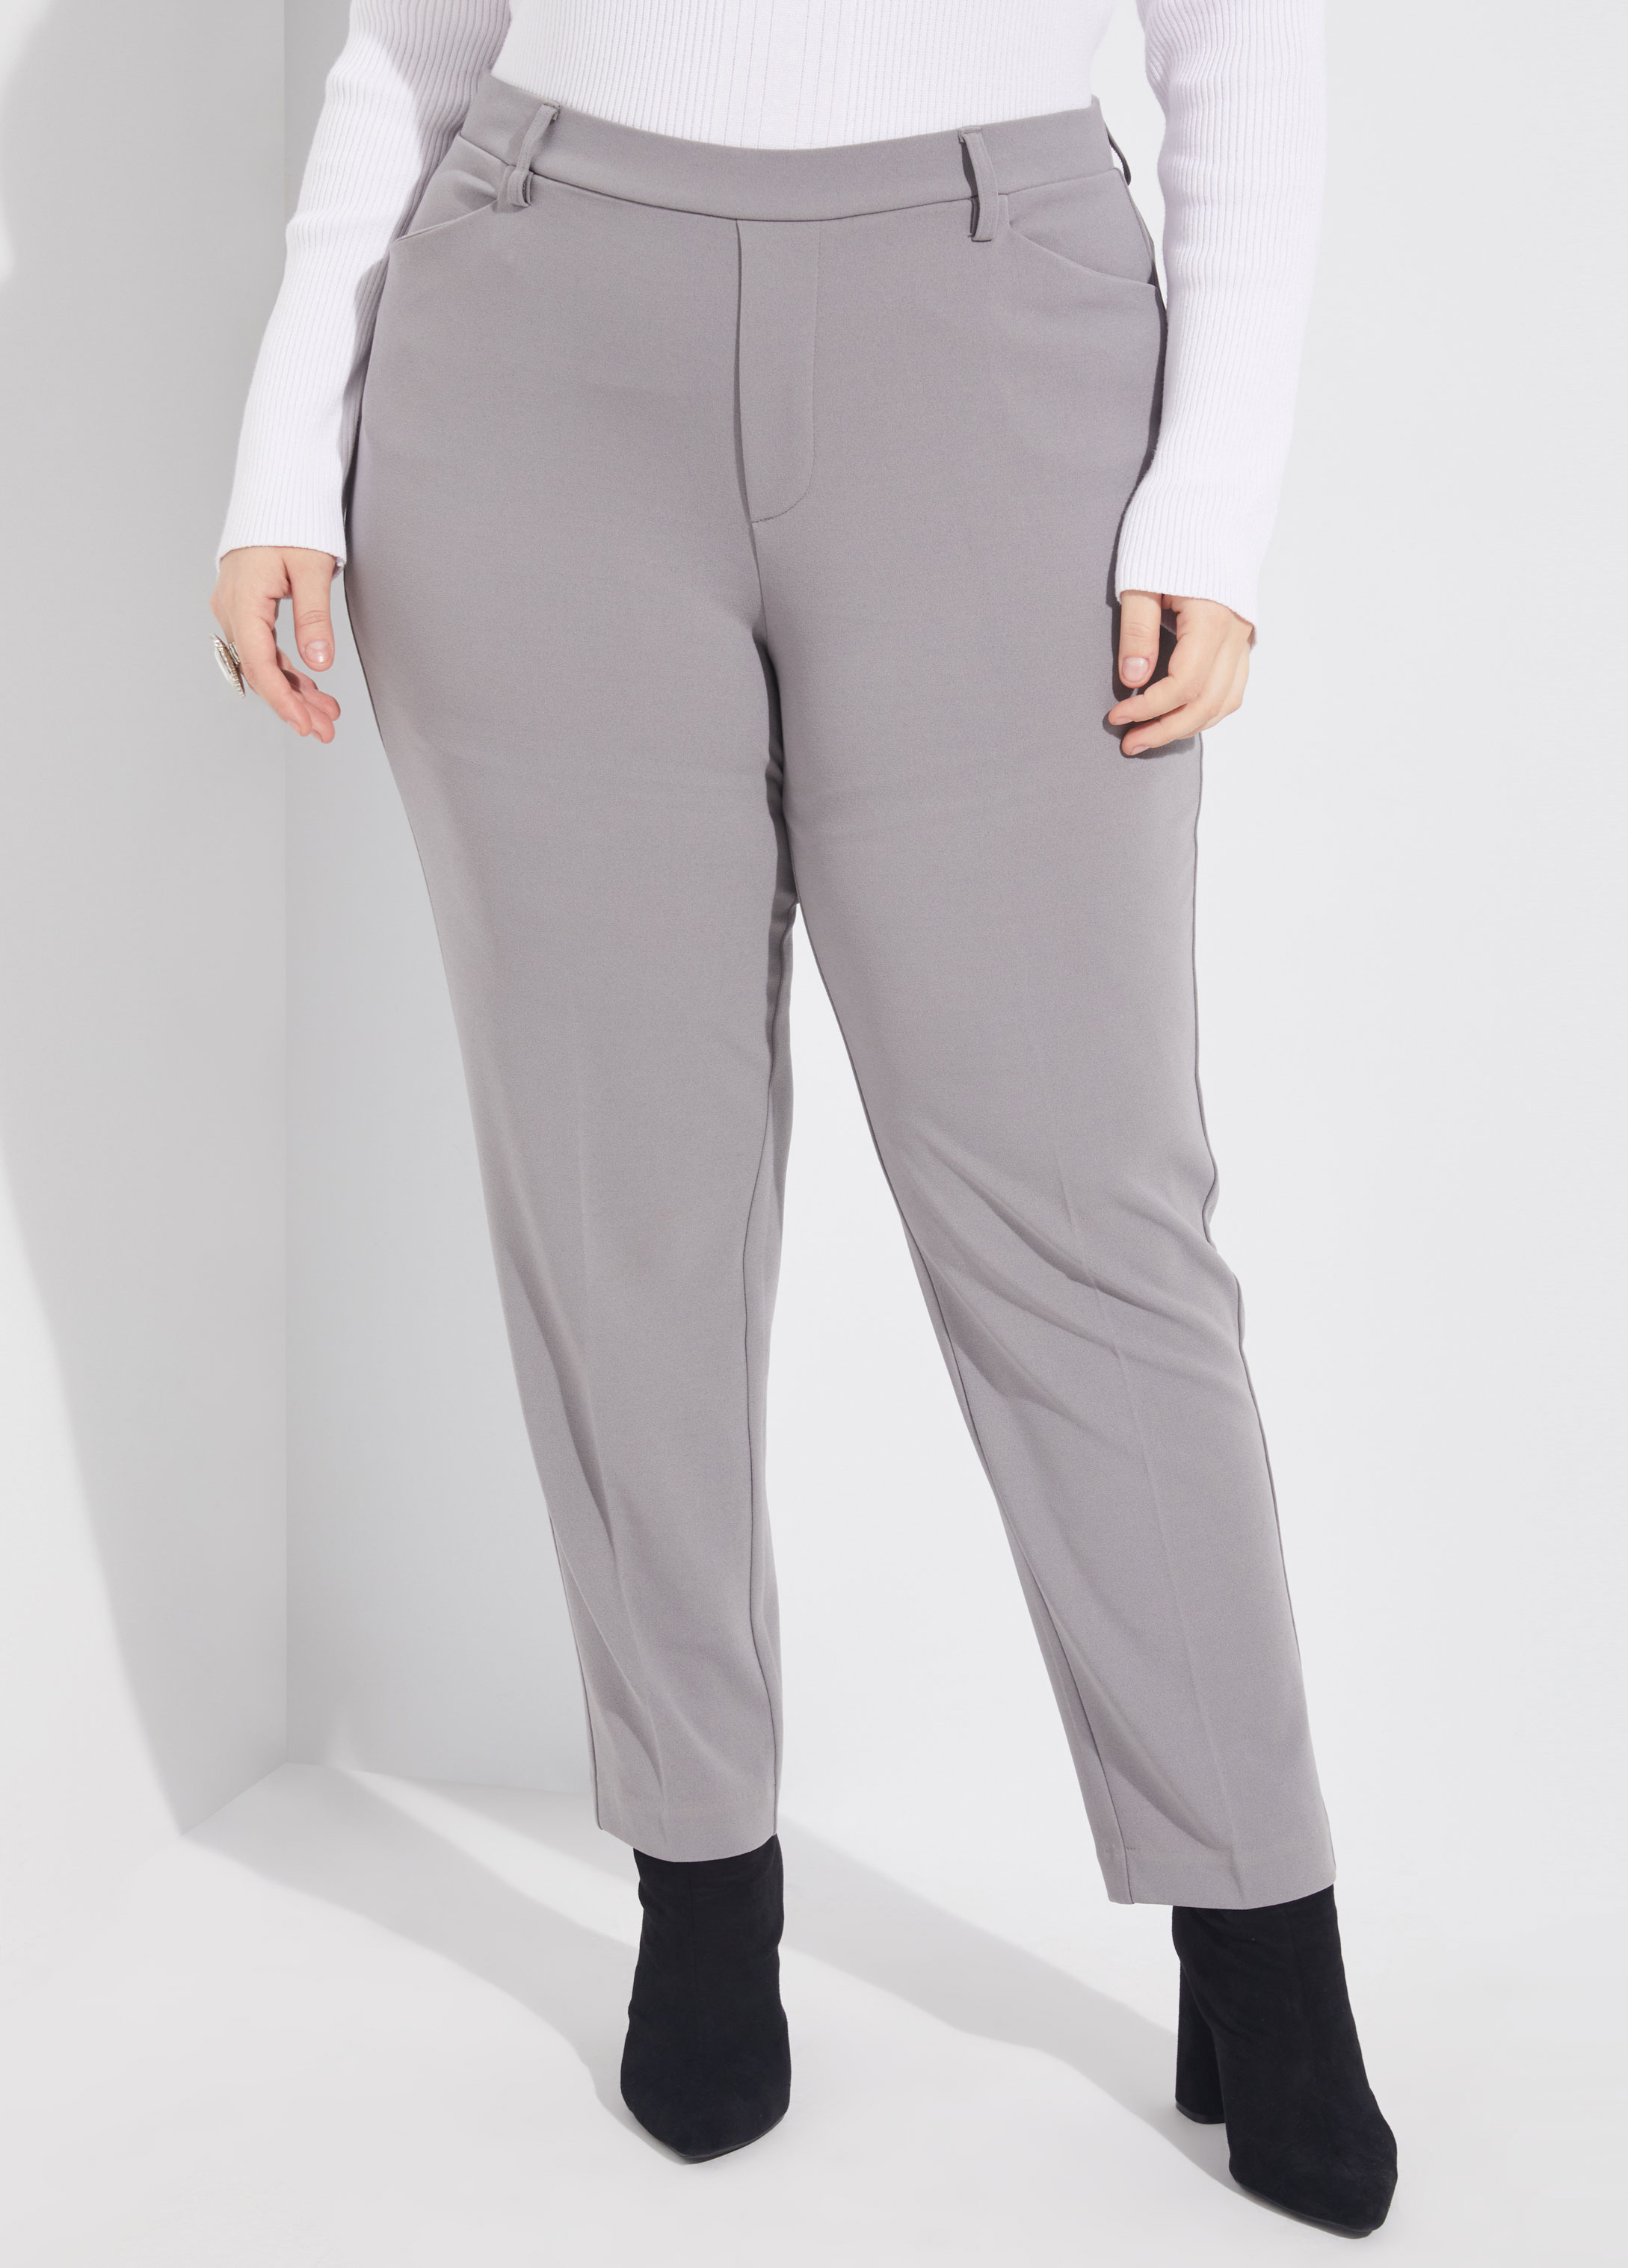 Plus Size ankle pants business casual plus size skinny pants